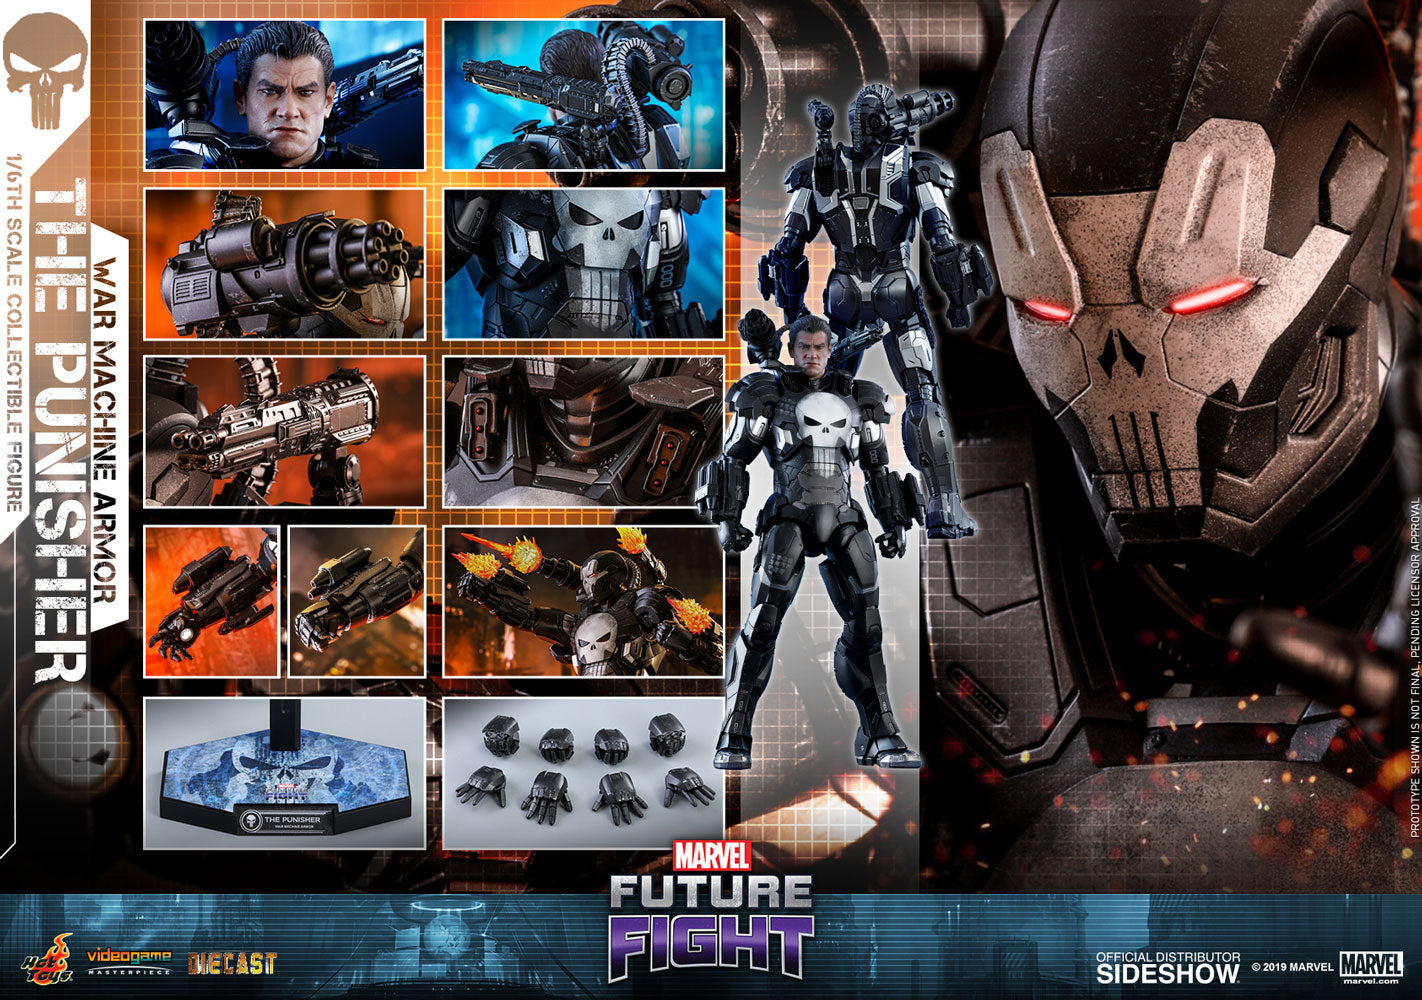 The Punisher War Machine Armor Sixth Scale Figure by Hot Toys